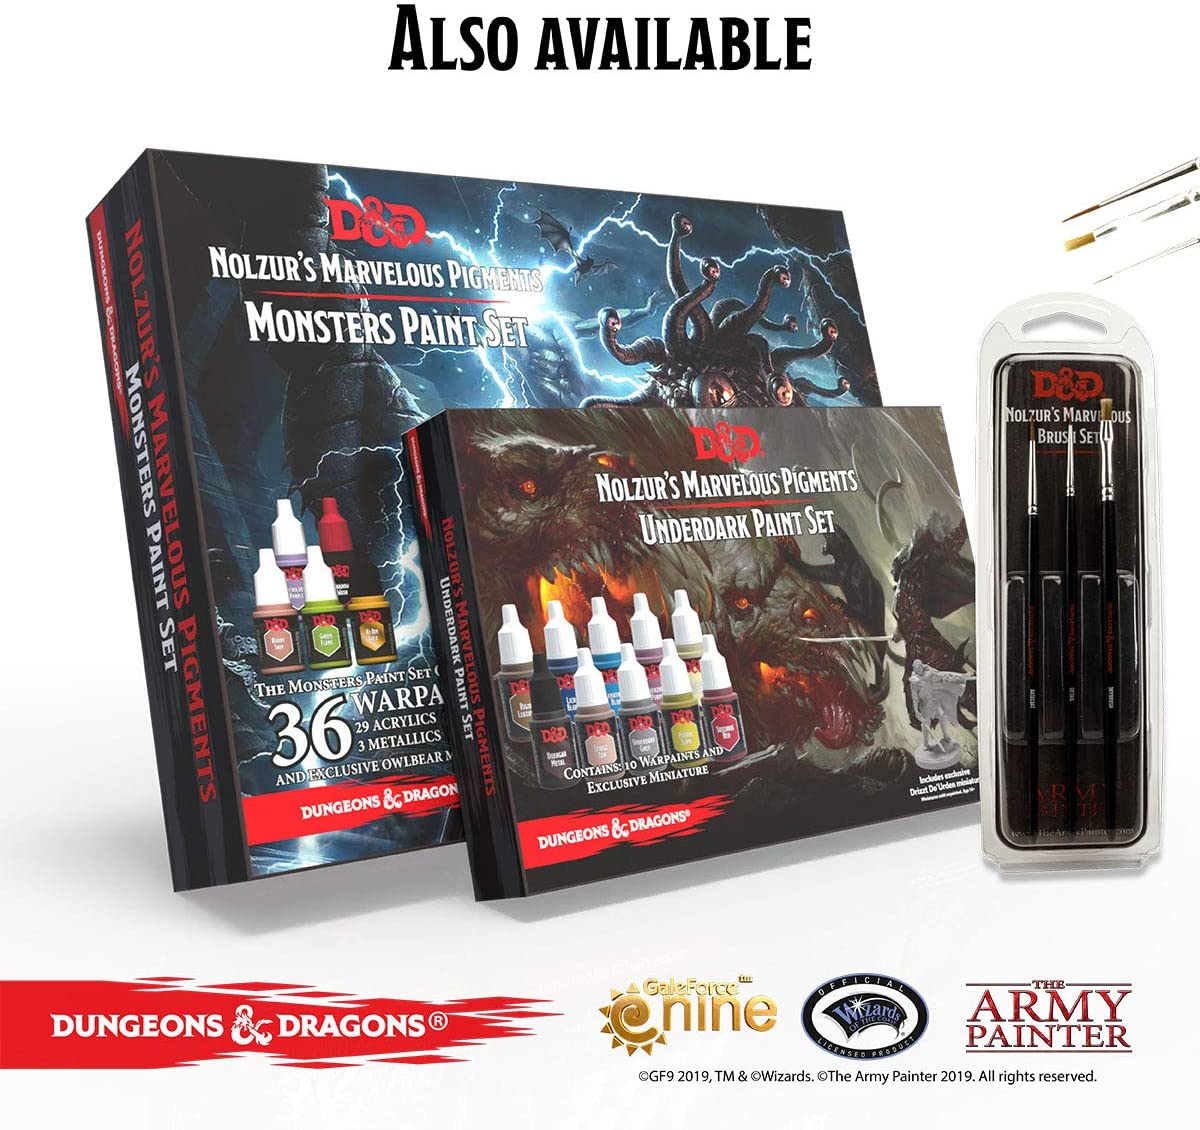 The Army Painter Dungeons and Dragons Official Paint Line Adventurer's Paint Set also available